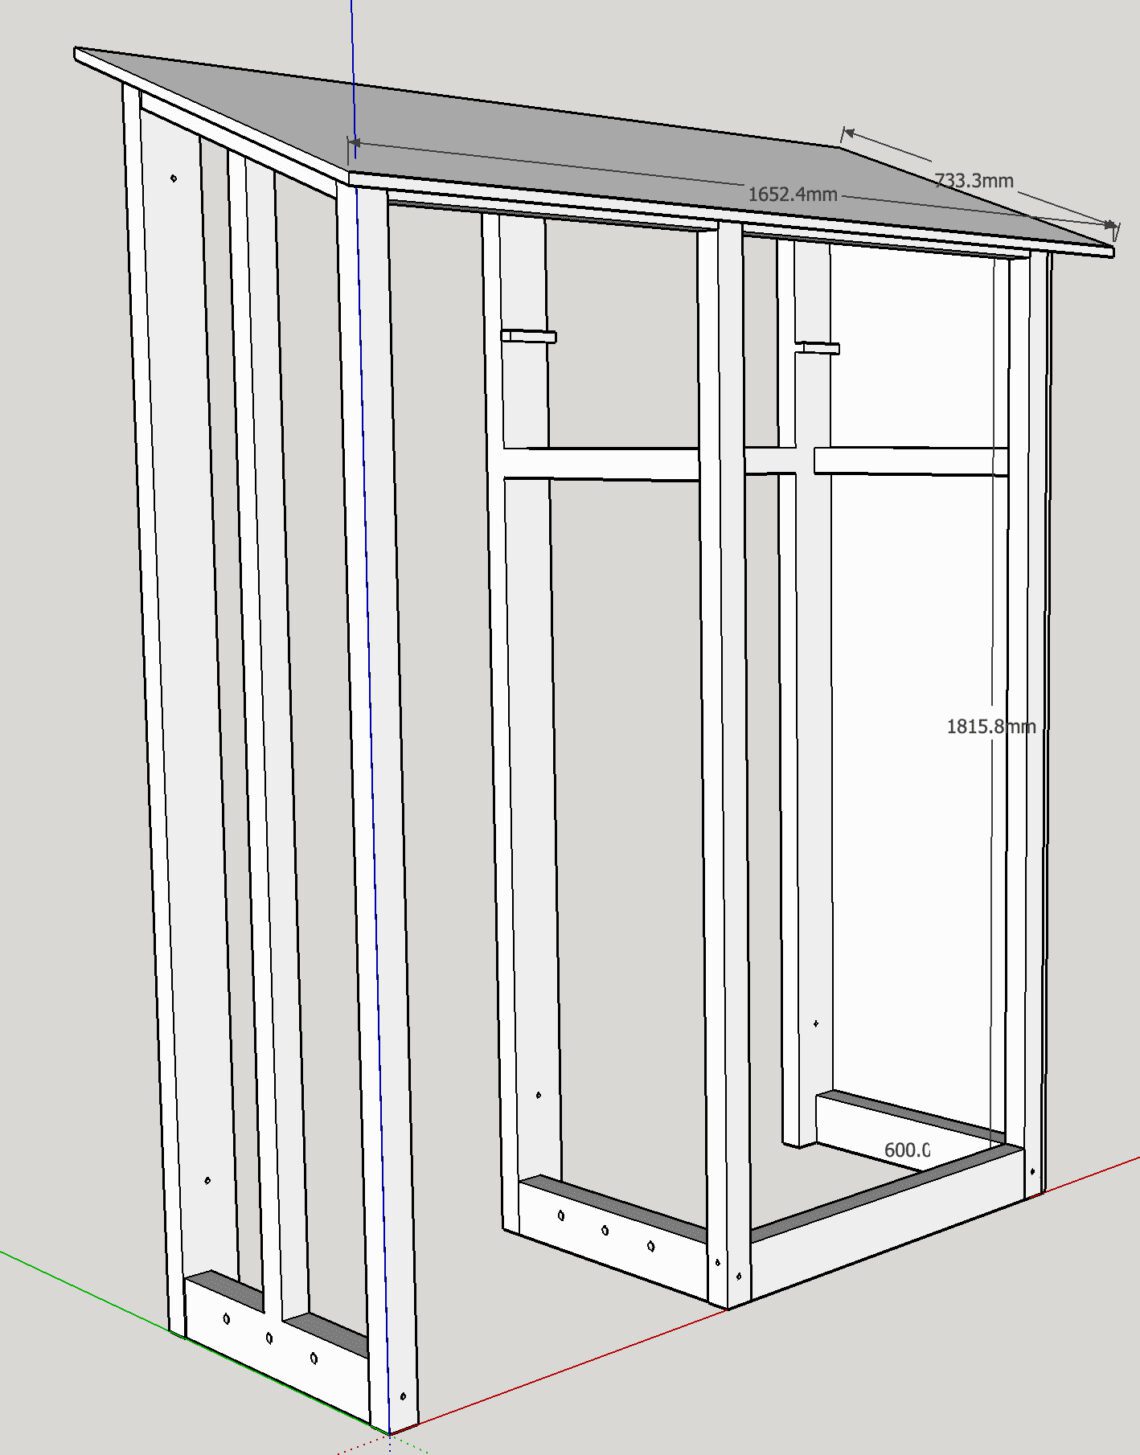 SketchUp plan for approval